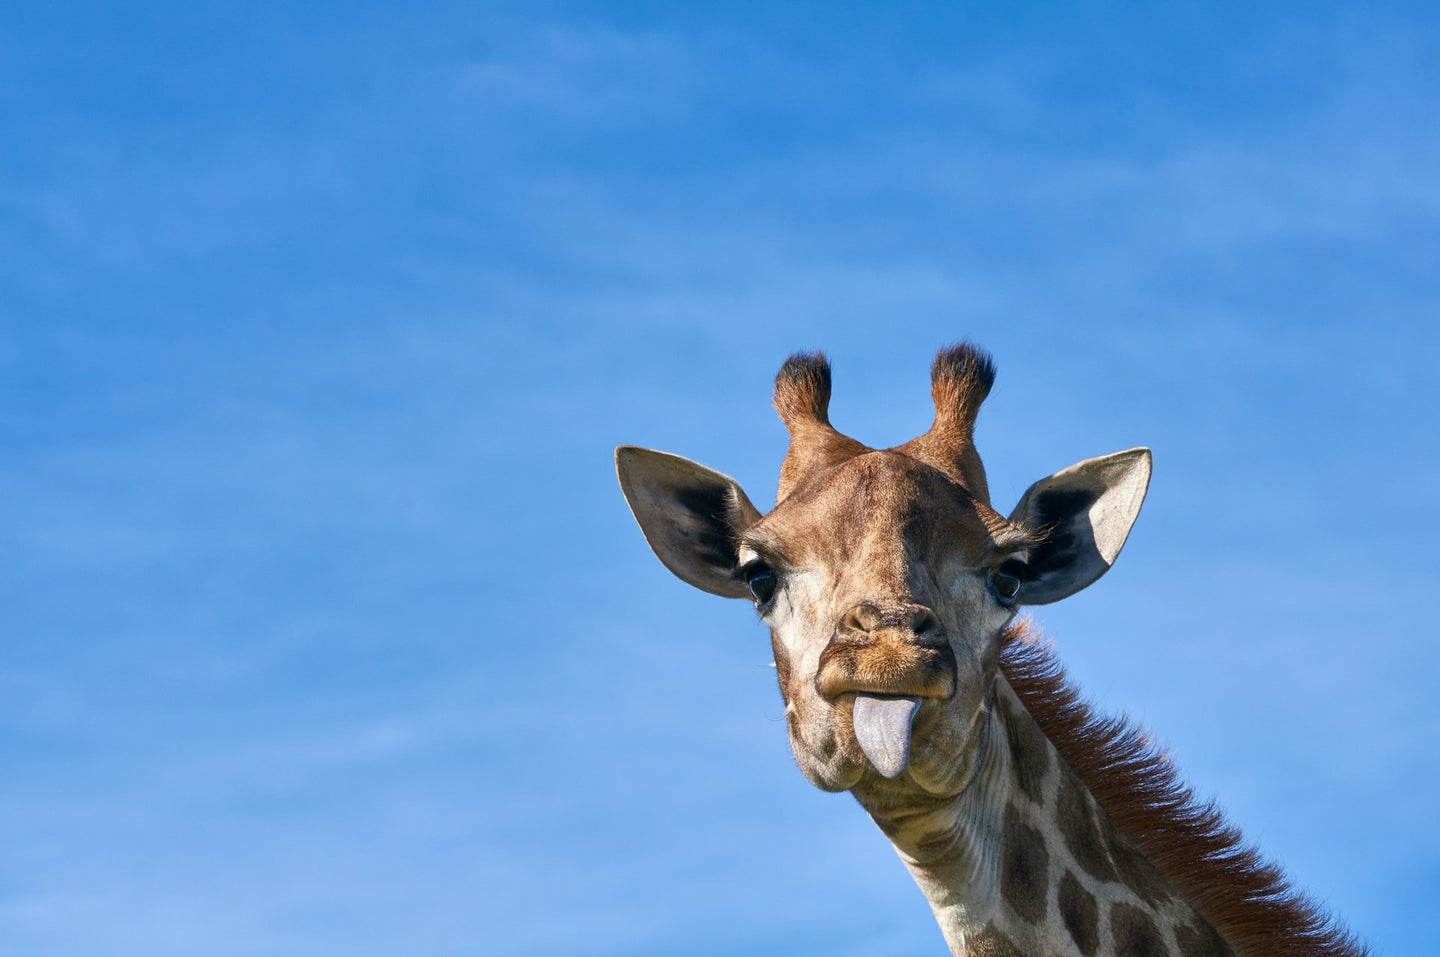 a giraffe sticks its tongue out against the background of a bright blue sky